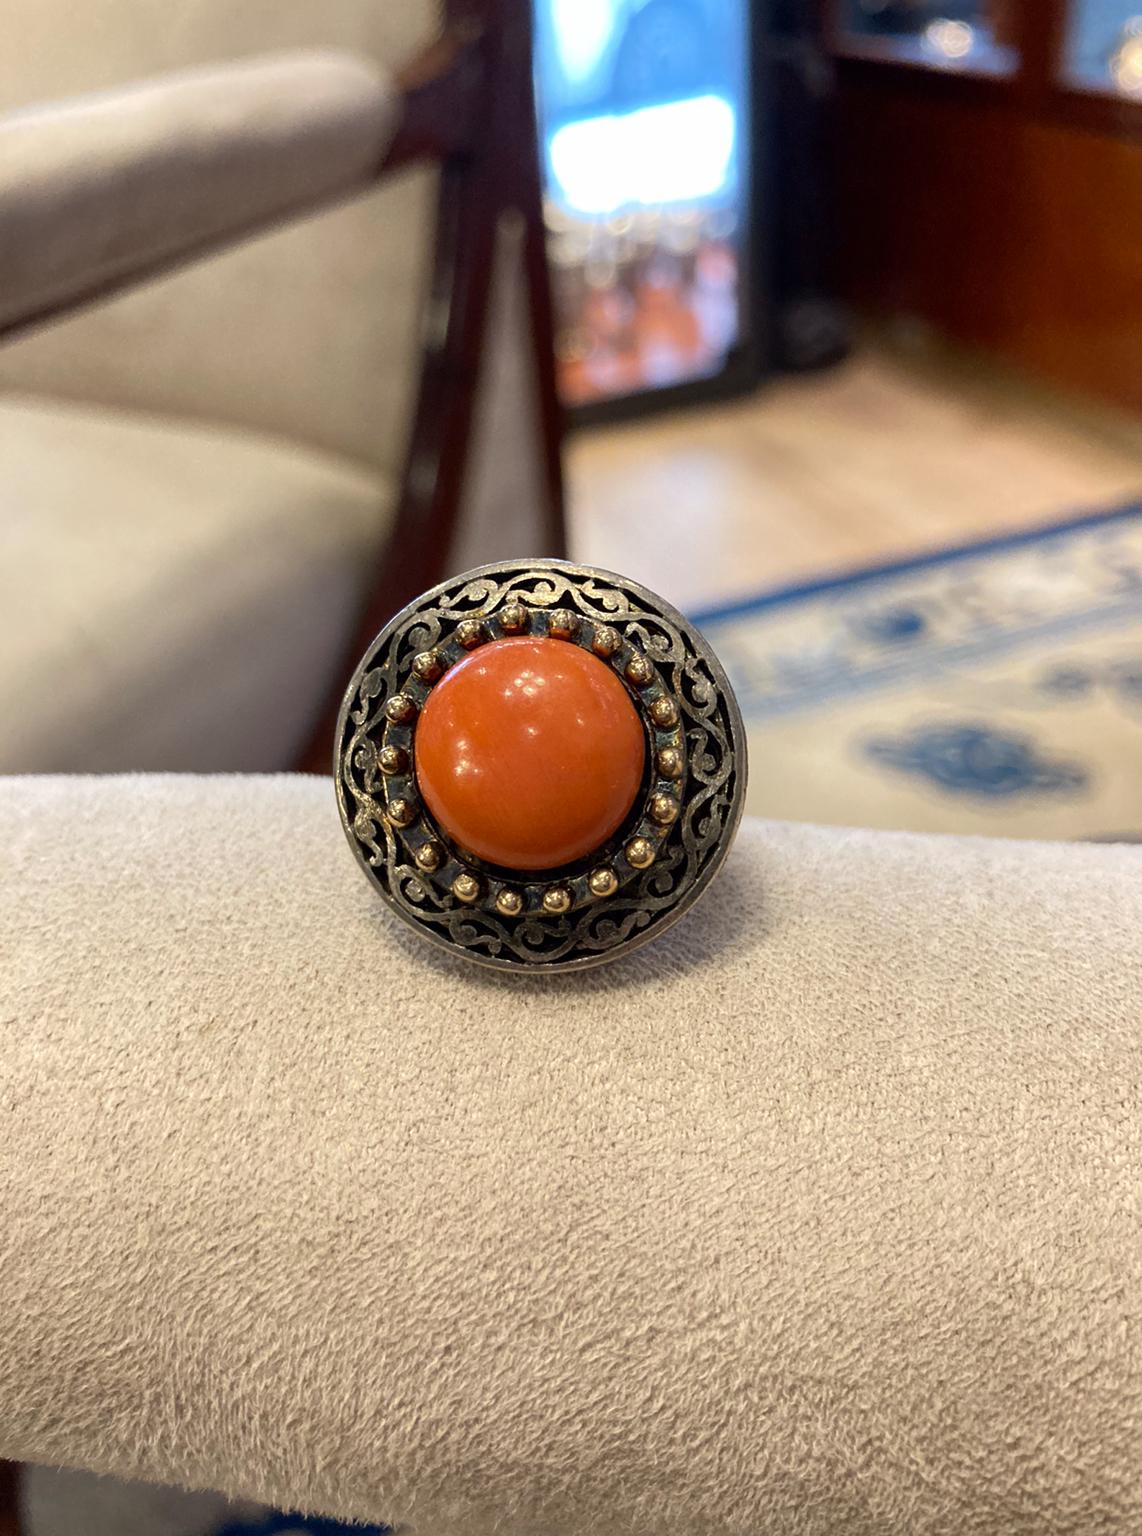 A beautiful antique coral ring with a yellow gold and silver mounting. Likely a Georgian period button converted into a ring at some point during the late nineteenth - early twentieth century.